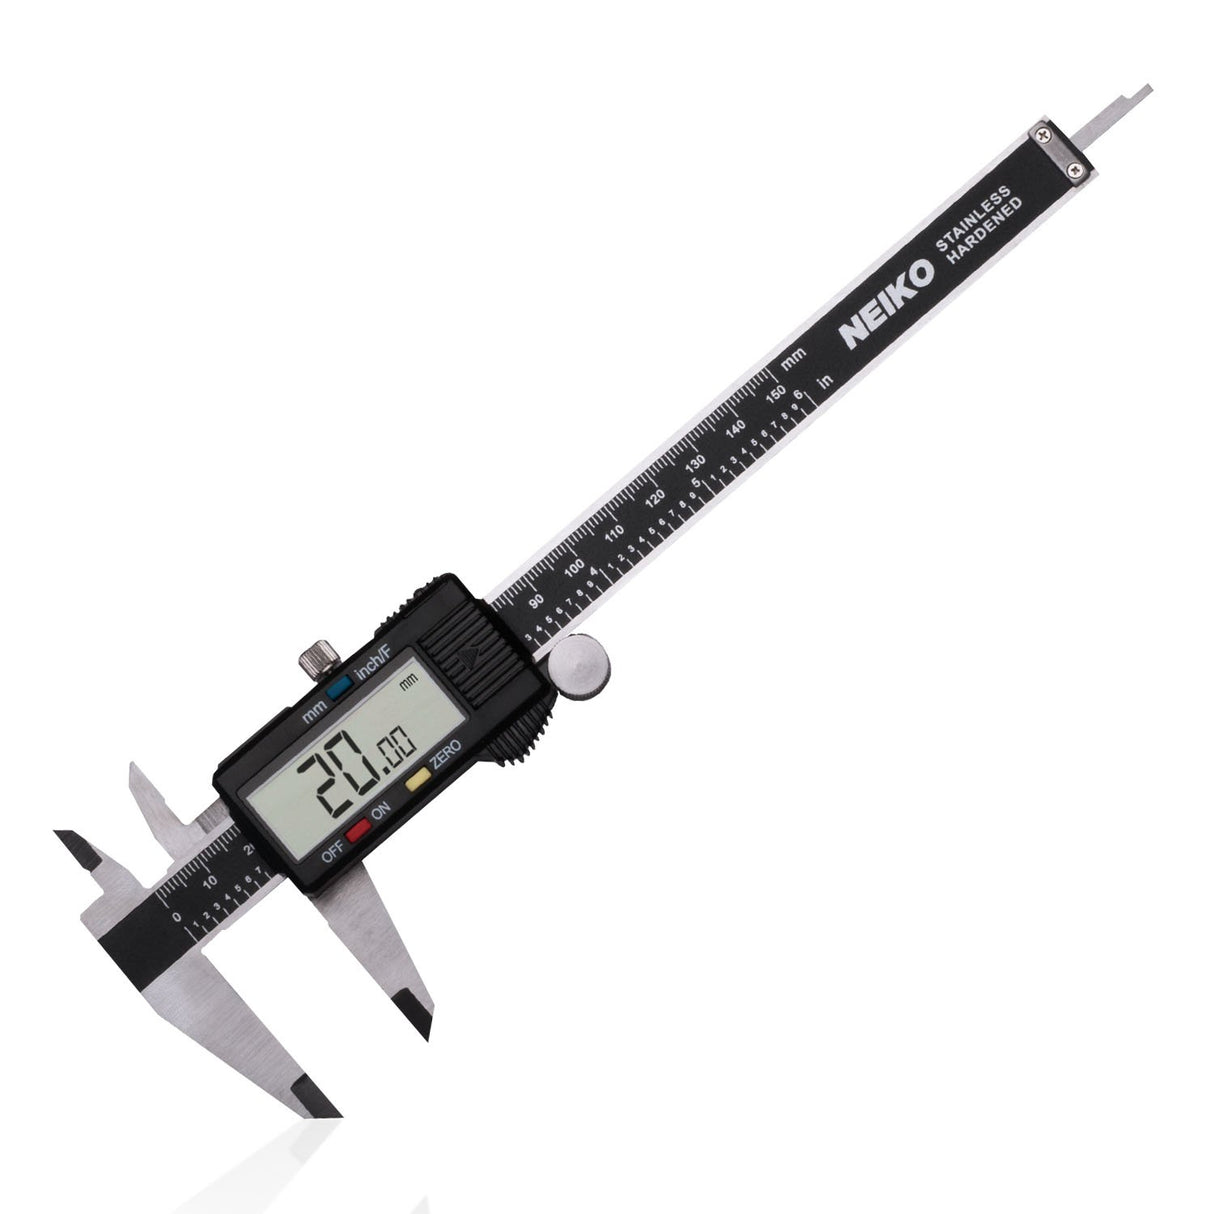 NEIKO 01407A Electronic Digital Caliper | 0-6 Inches | Stainless Steel Construction with Large LCD Screen | Quick Change Button for Inch/Fraction/Millimeter Conversions